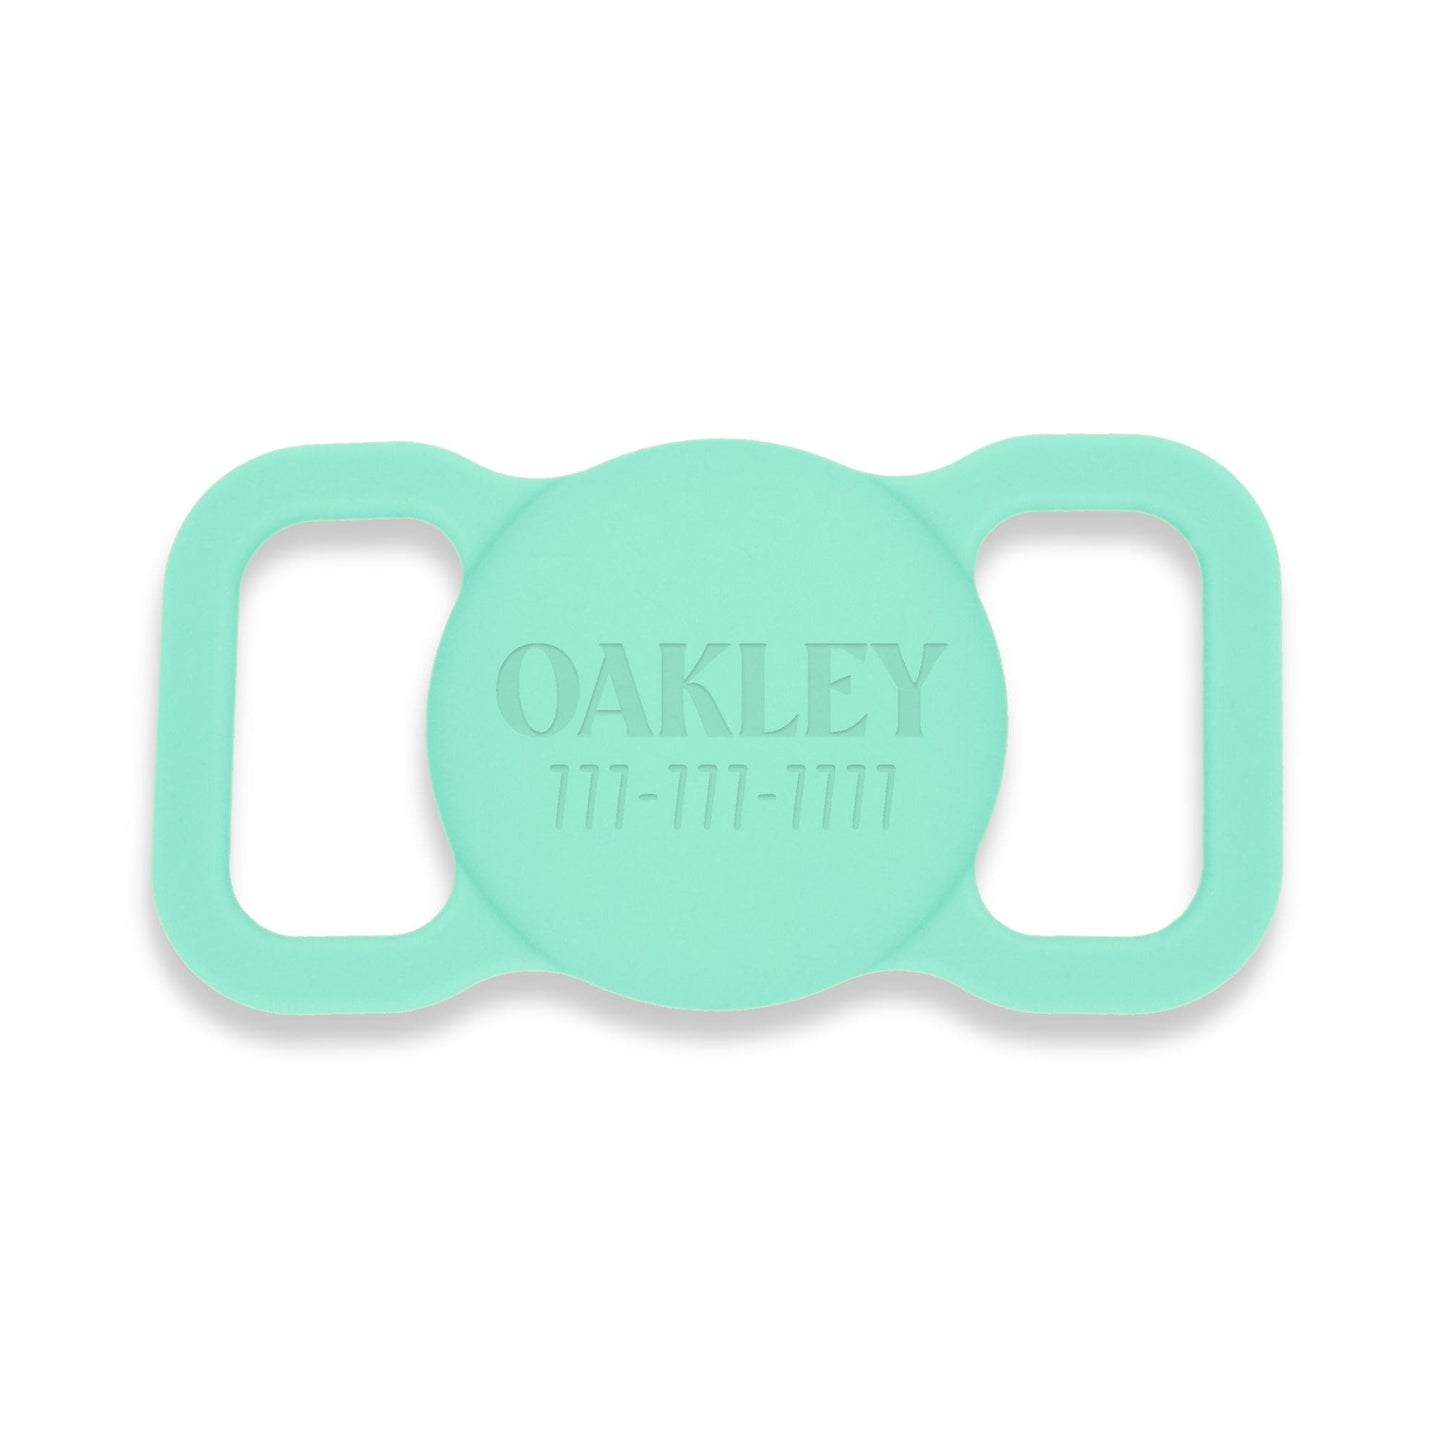 Aqua silicone AirTag holder. Pet's name and a phone # is engraved on the front.